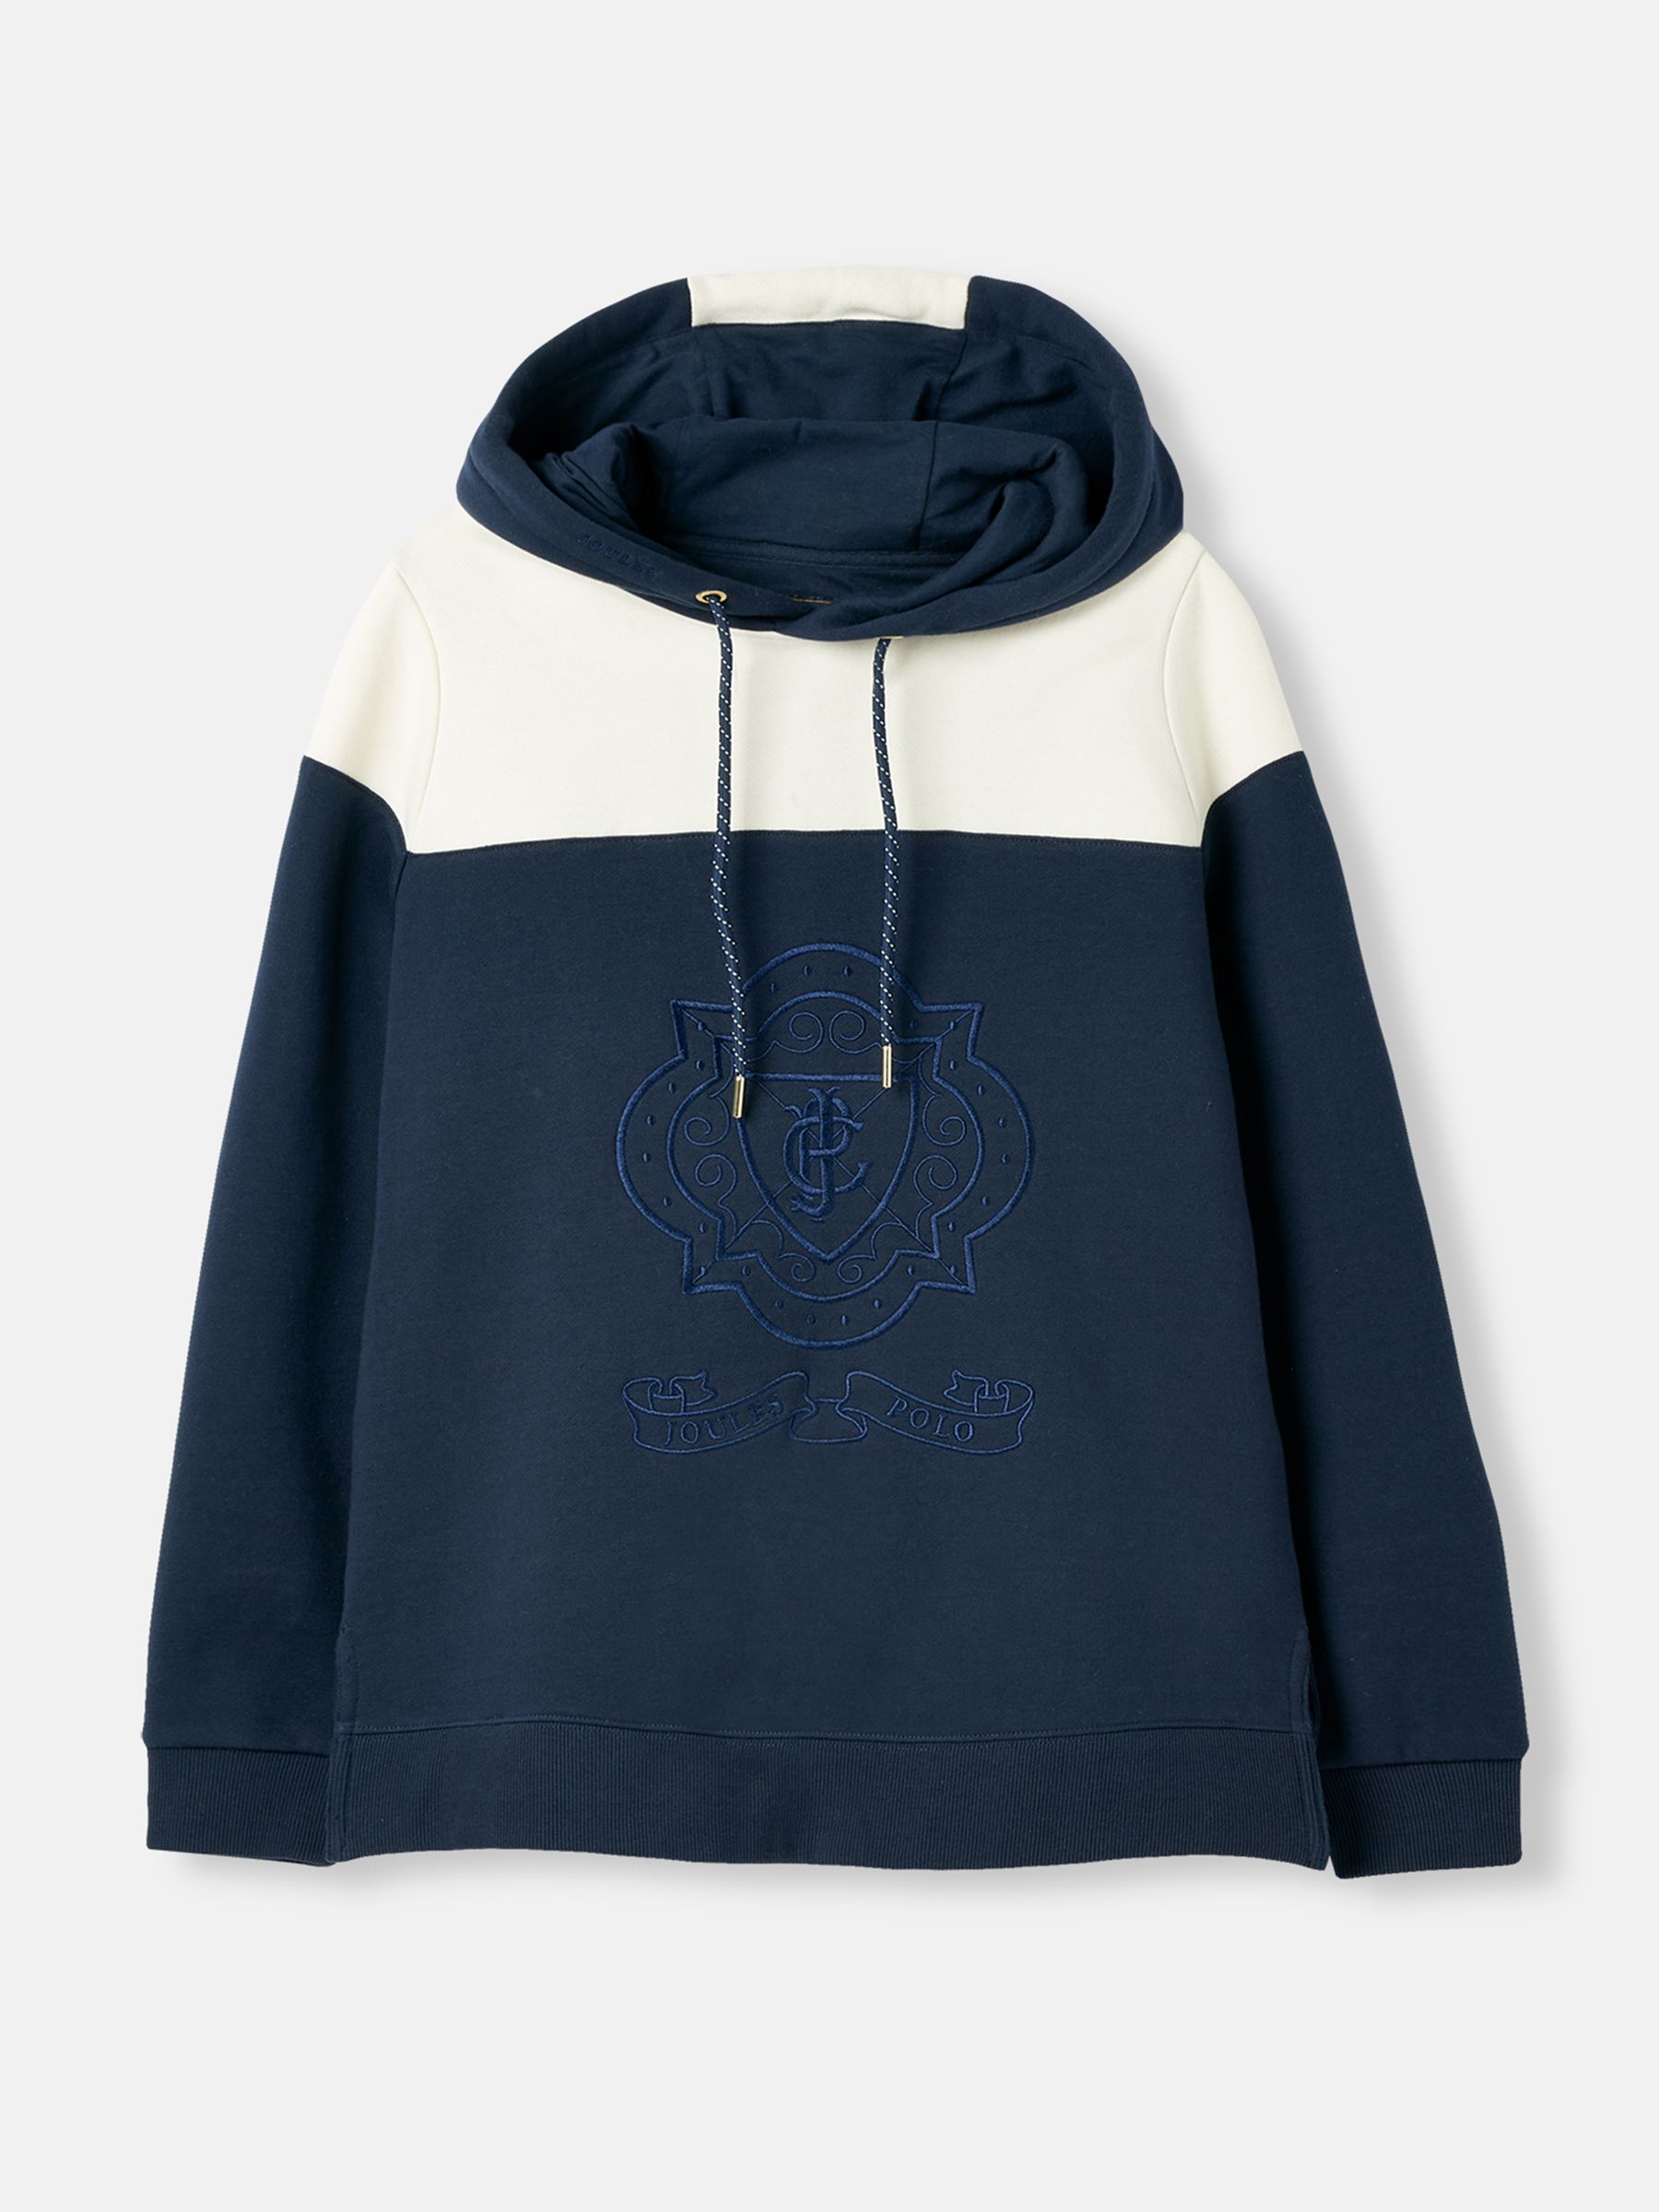 Buy Alexa Navy Embroidered Hoodie from the Joules online shop